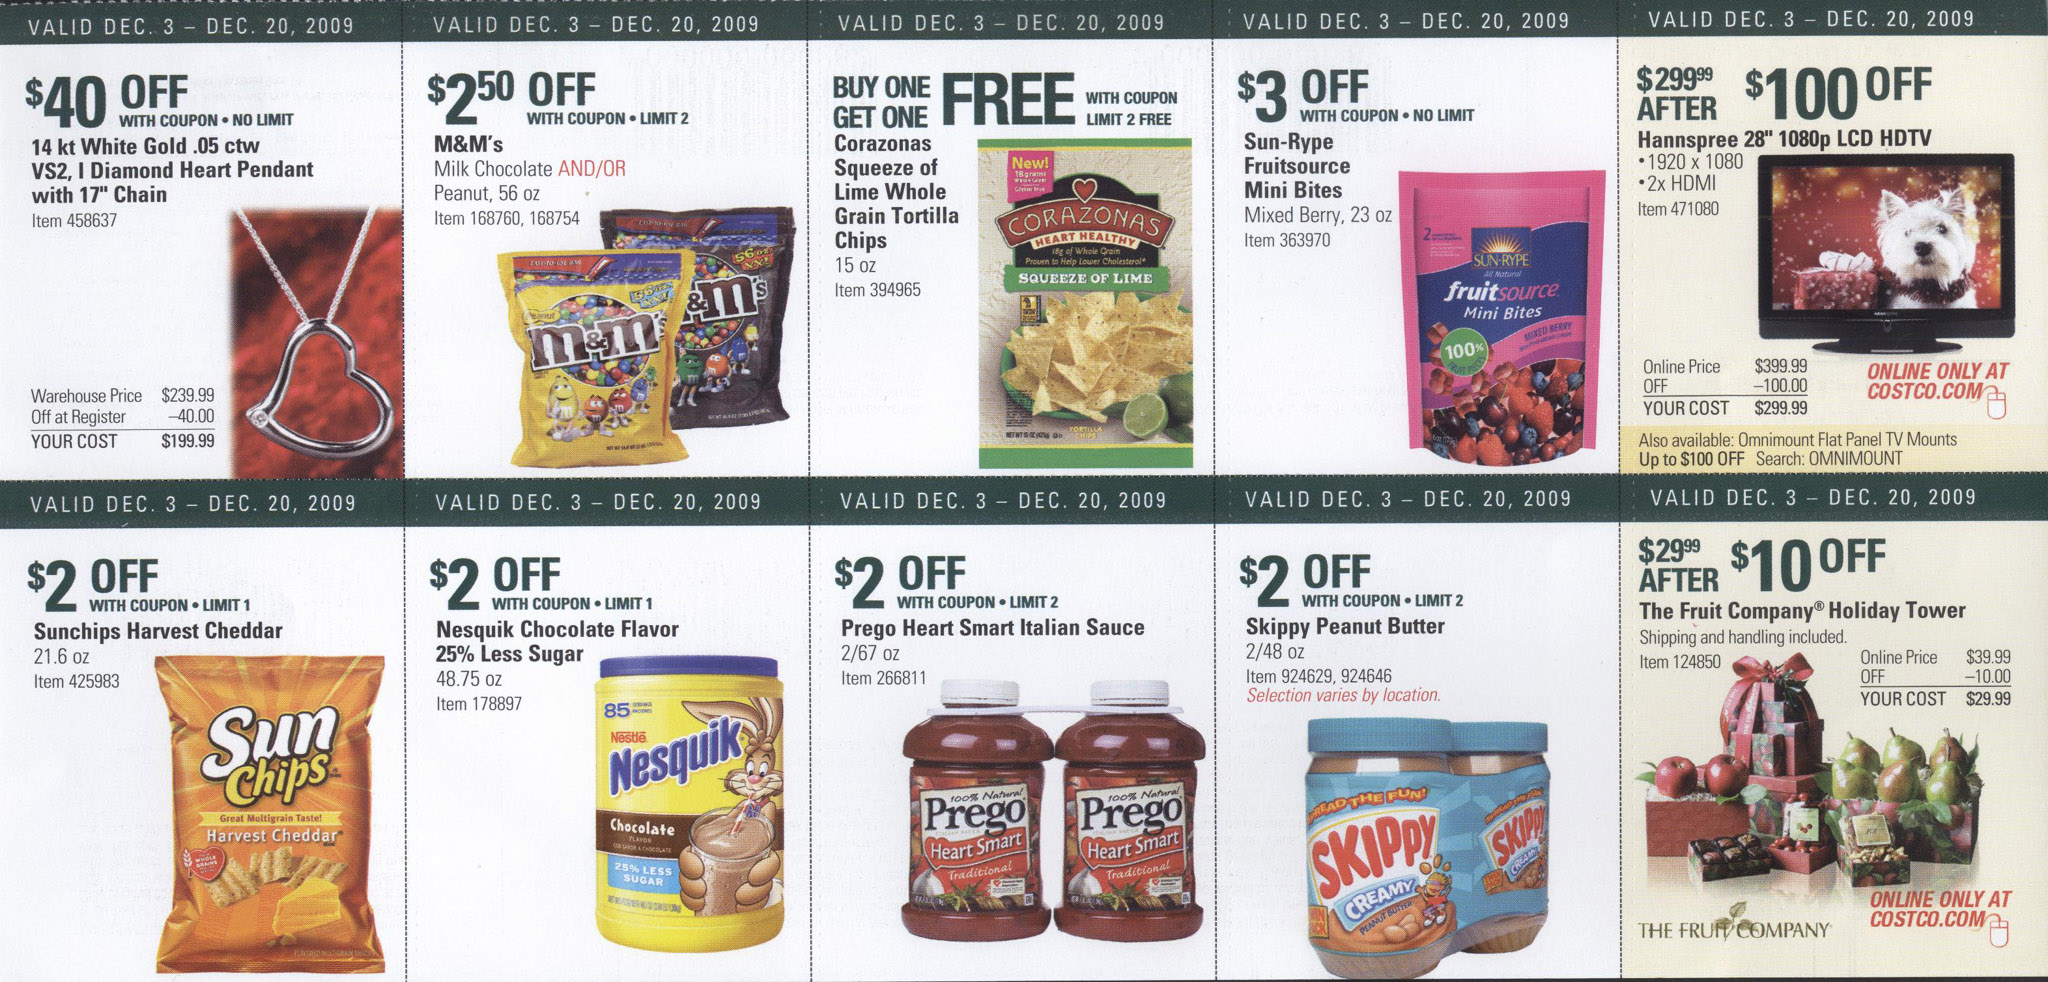 Coupon book page 2 in full-size.